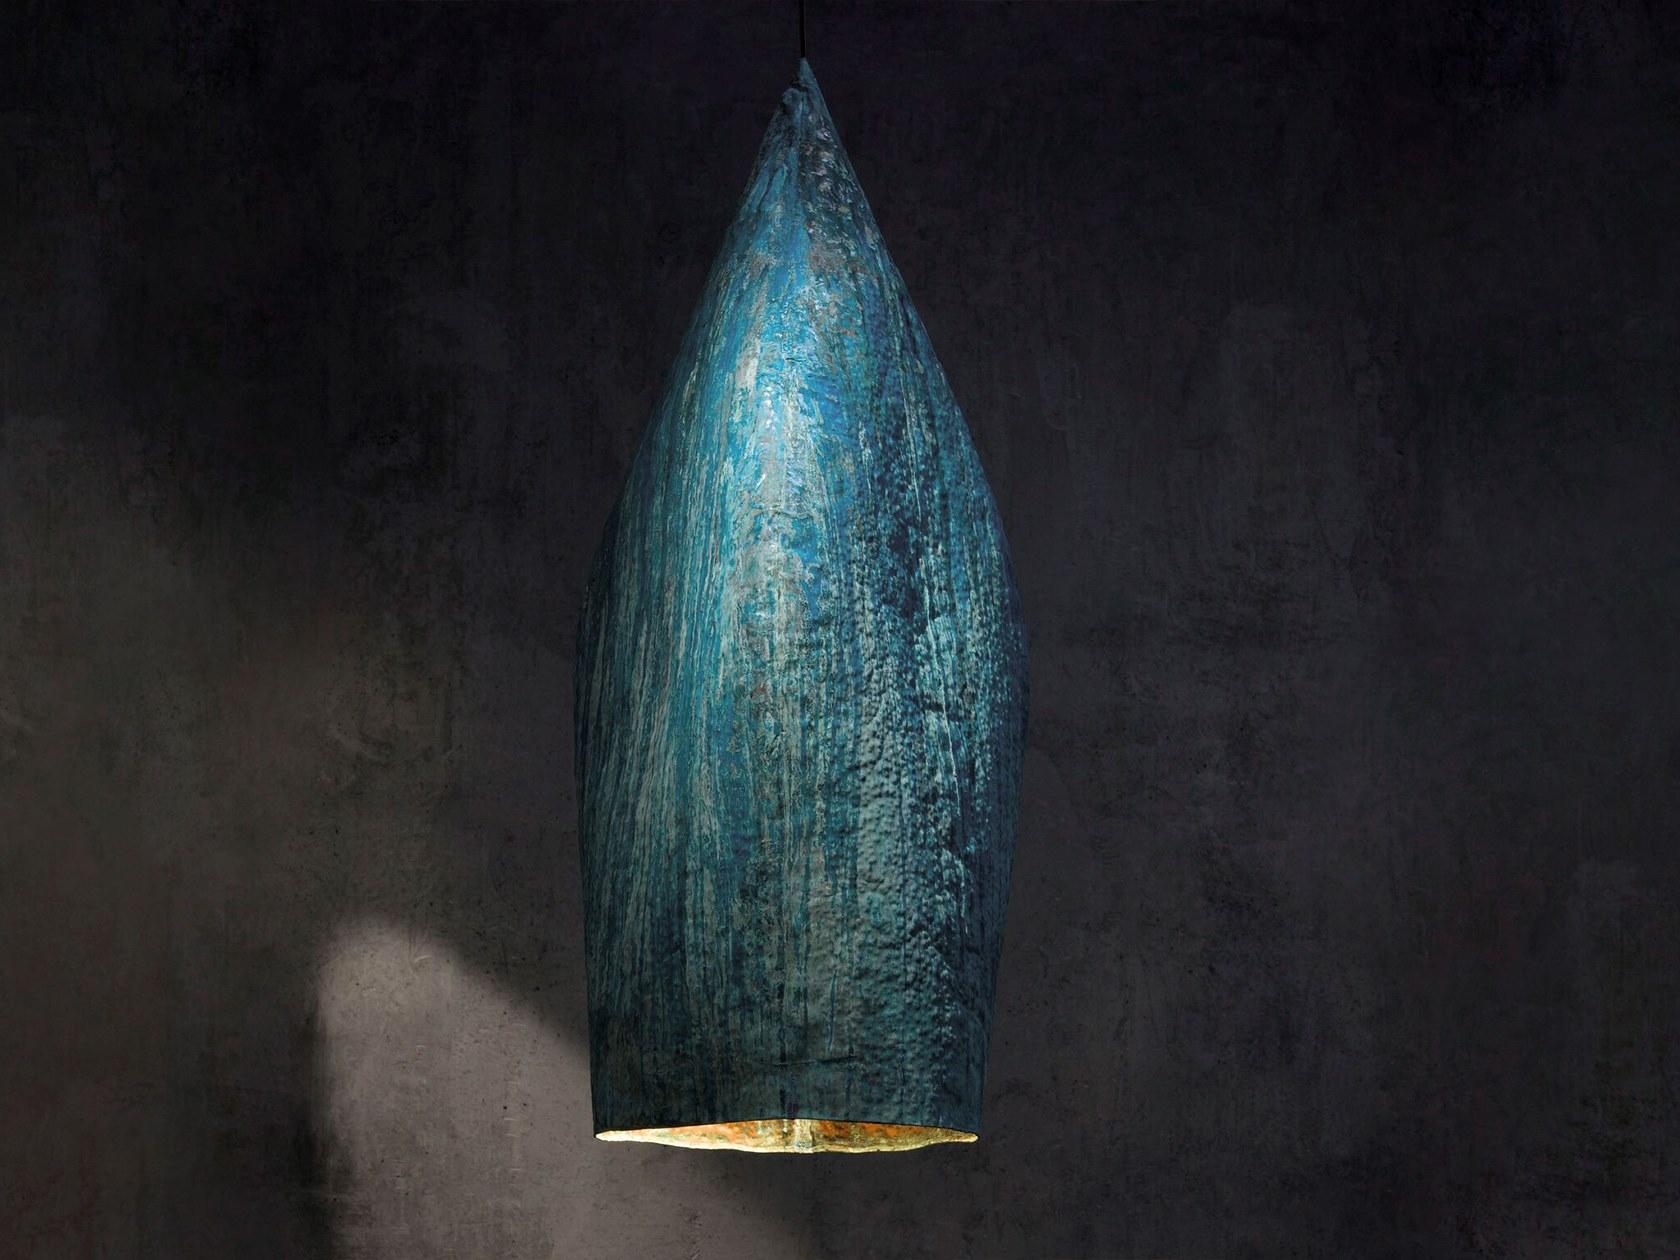 Gemma pendant lamp by Makhno.
Dimensions: D 74 x W 74 x H 161 cm.
Materials: copper.

Makhno studio is a workshop of modern Ukrainian design and architecture. We work in Ukrainian contemporary style. According to international experts, this